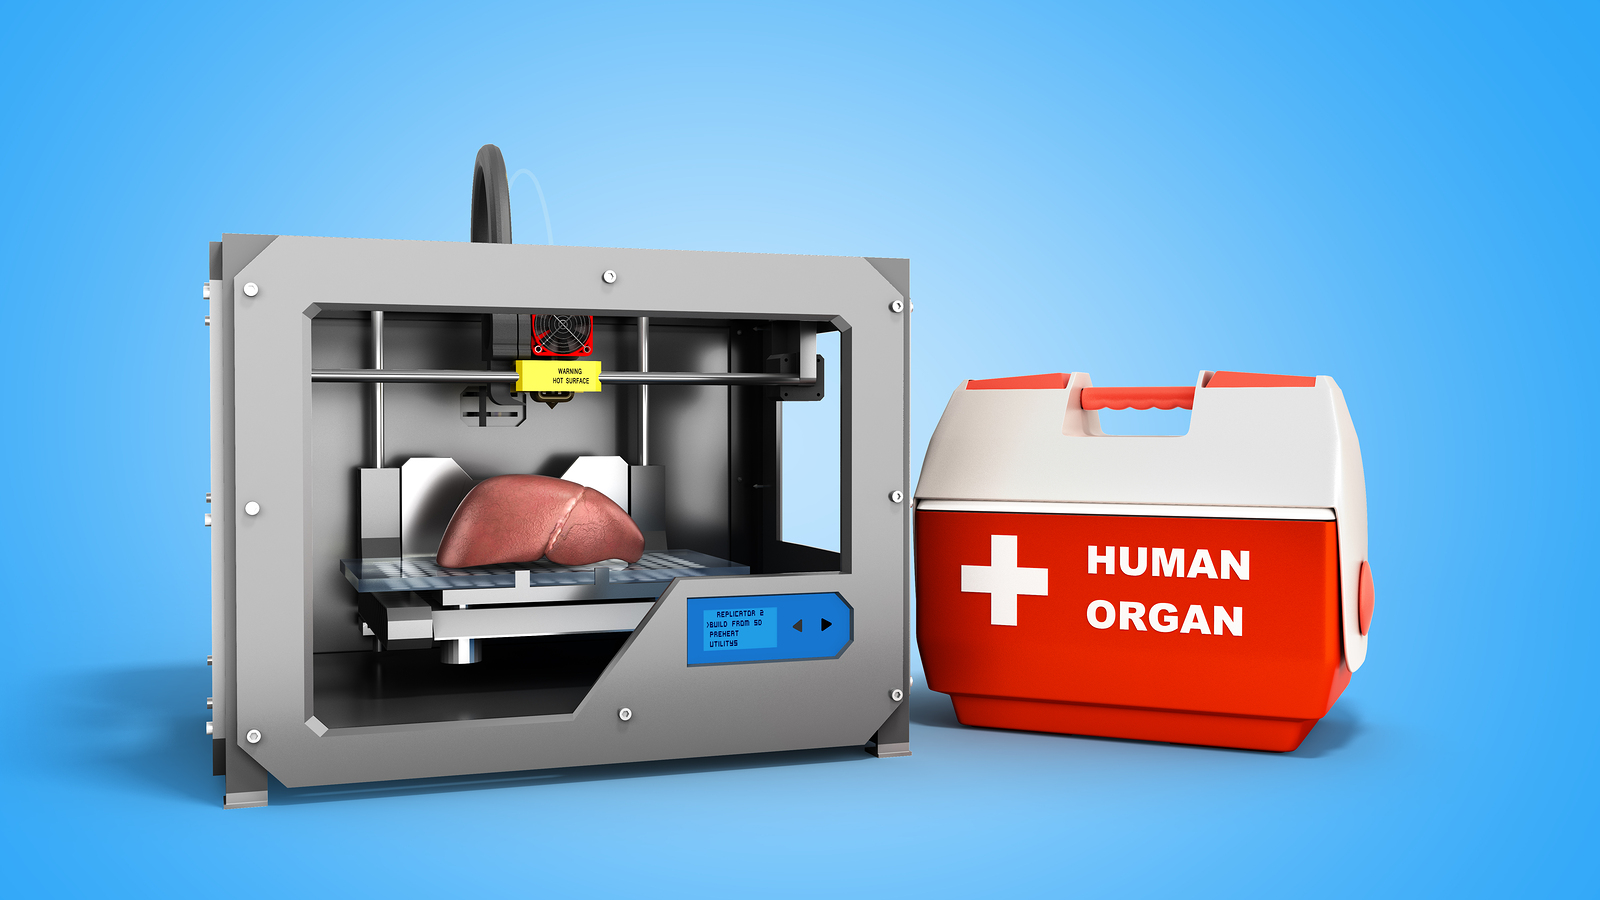 Researchers at Carnegie Mellon University have reduced the cost of 3D Bioprinters significantly. - Photo:Bigstock.com